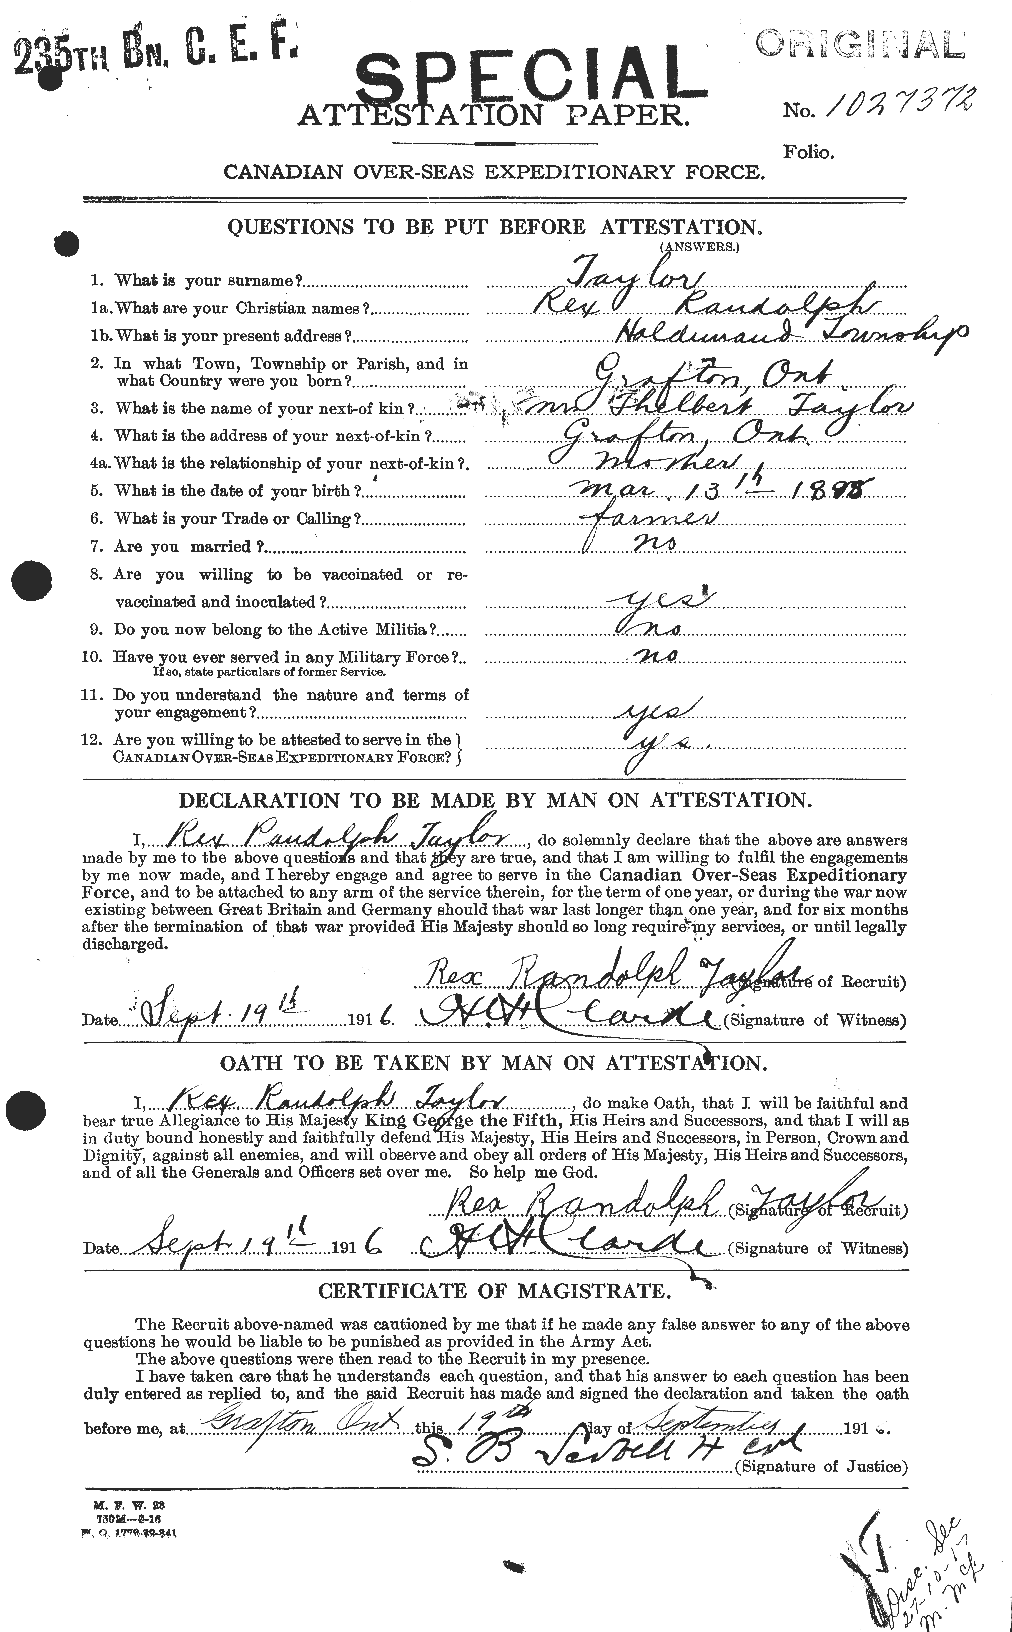 Personnel Records of the First World War - CEF 627813a